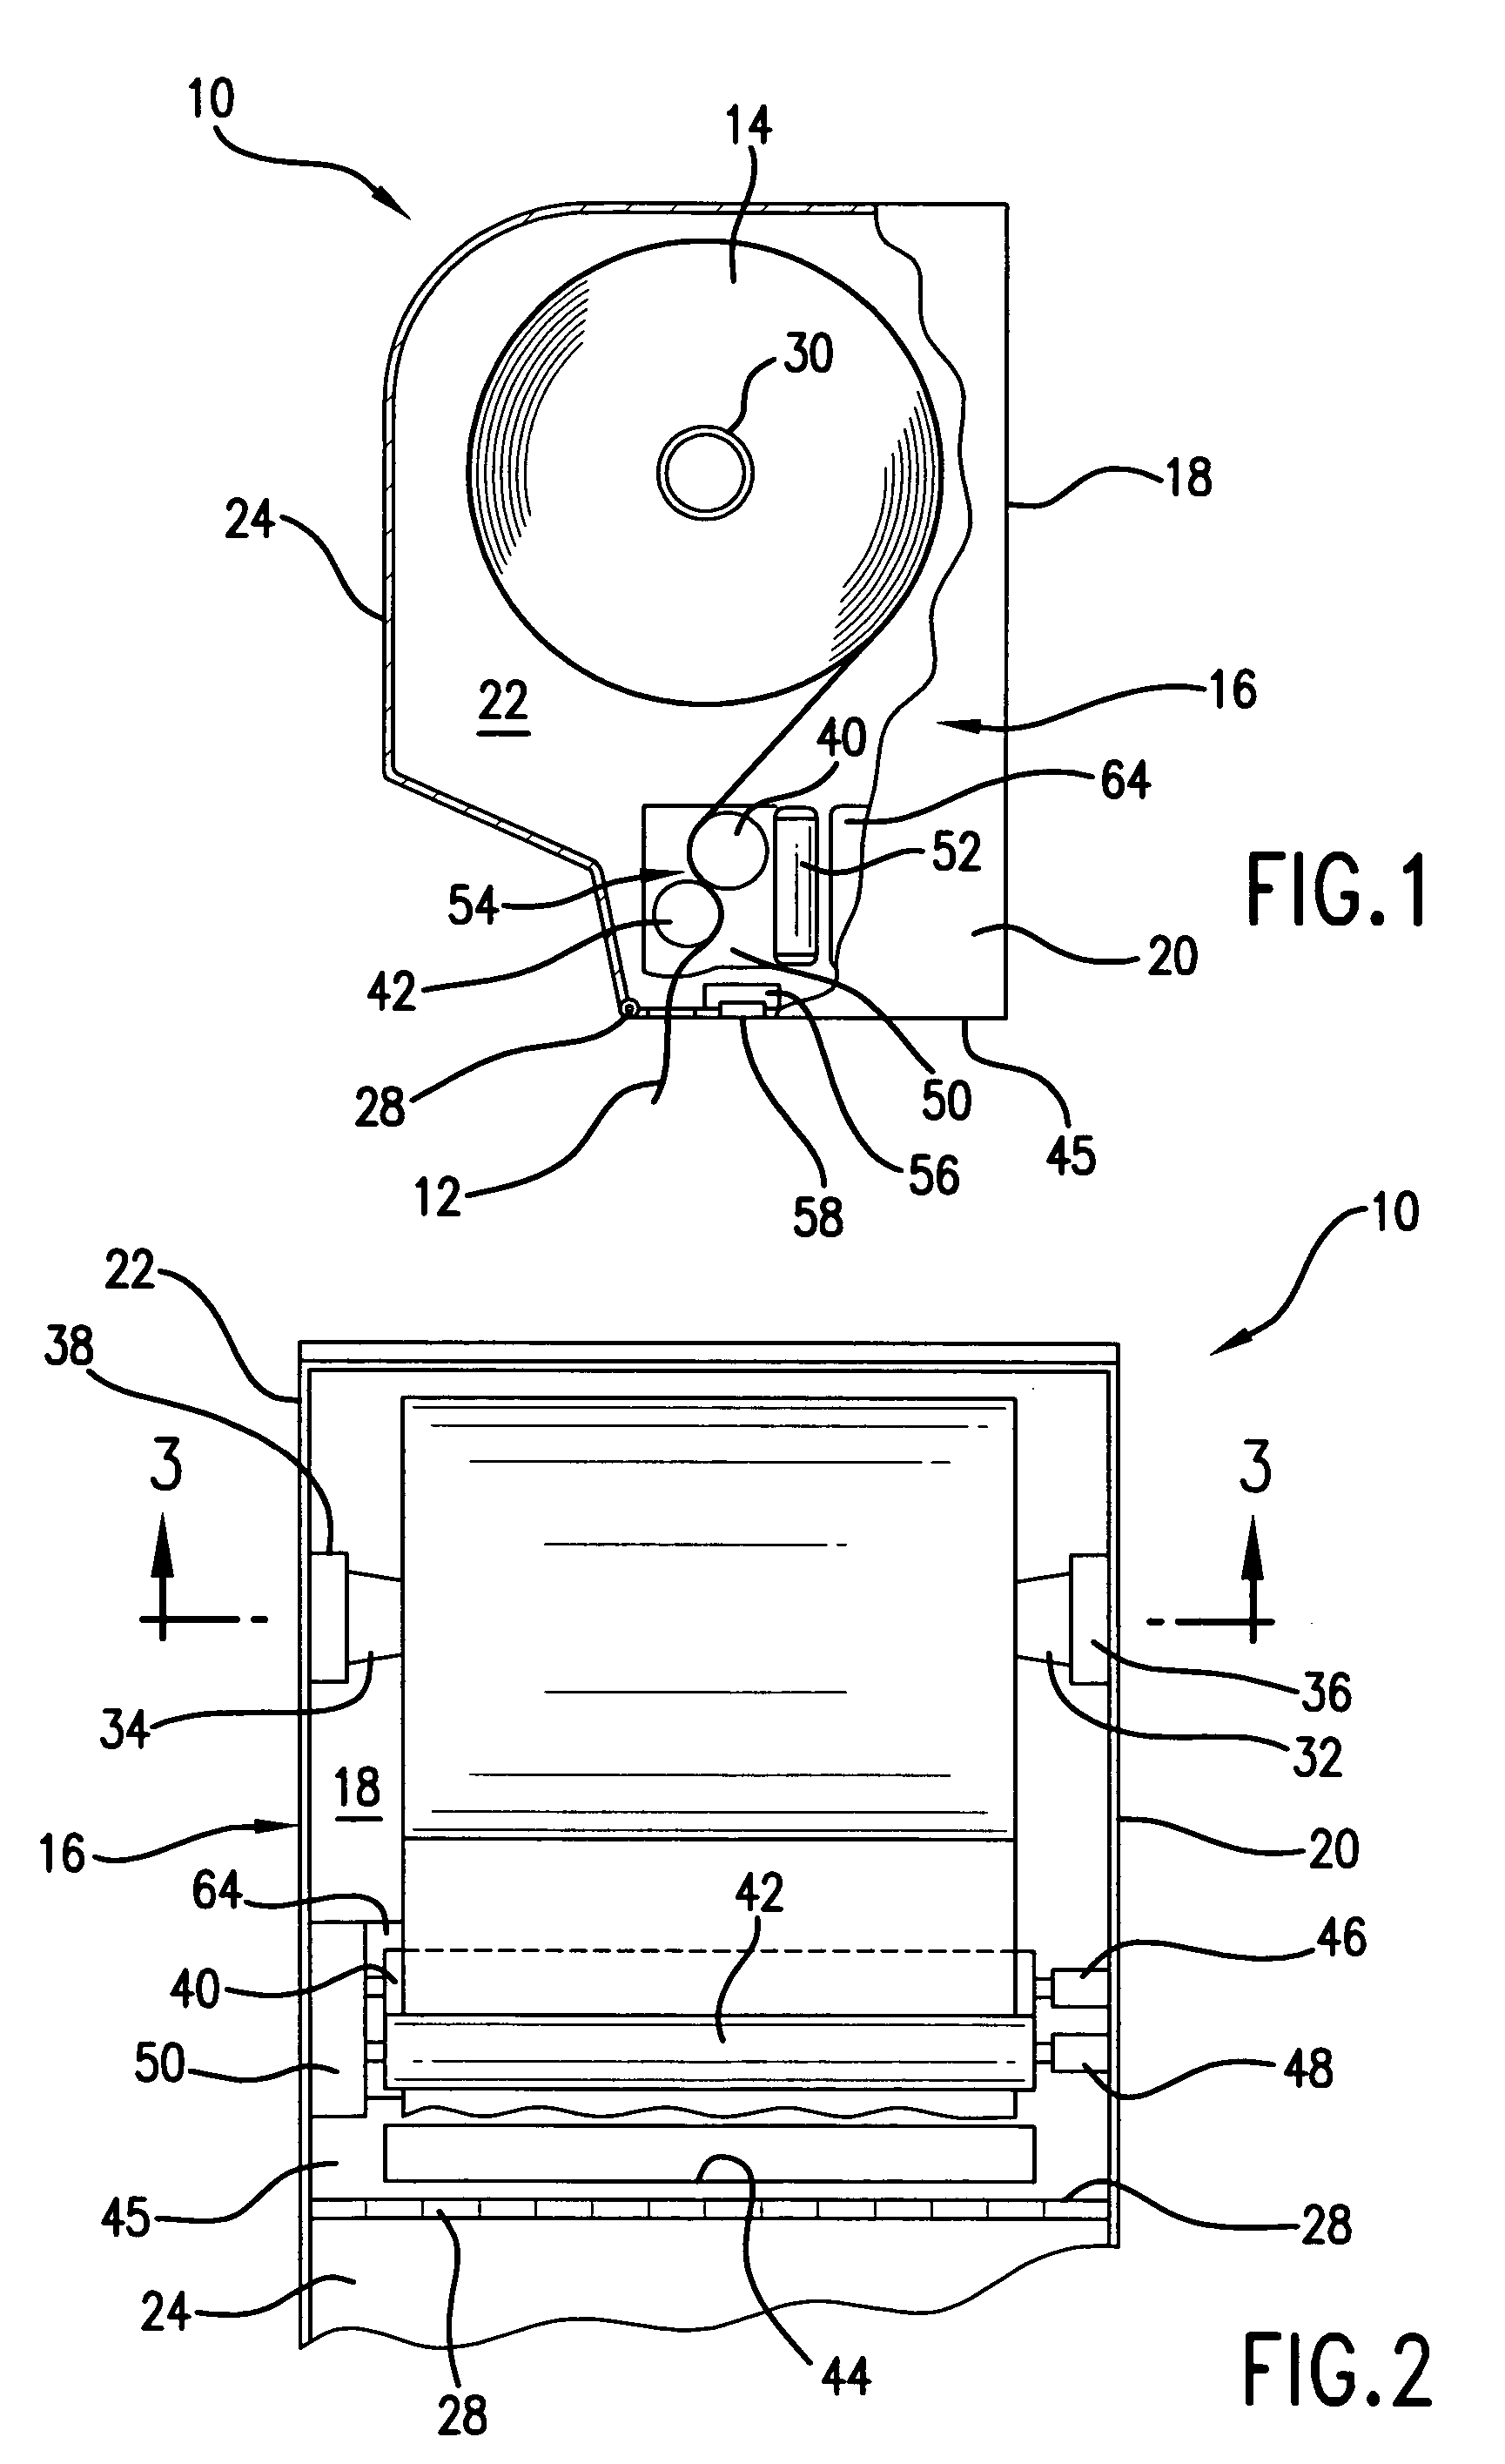 System and method for measuring, monitoring and controlling washroom dispensers and products